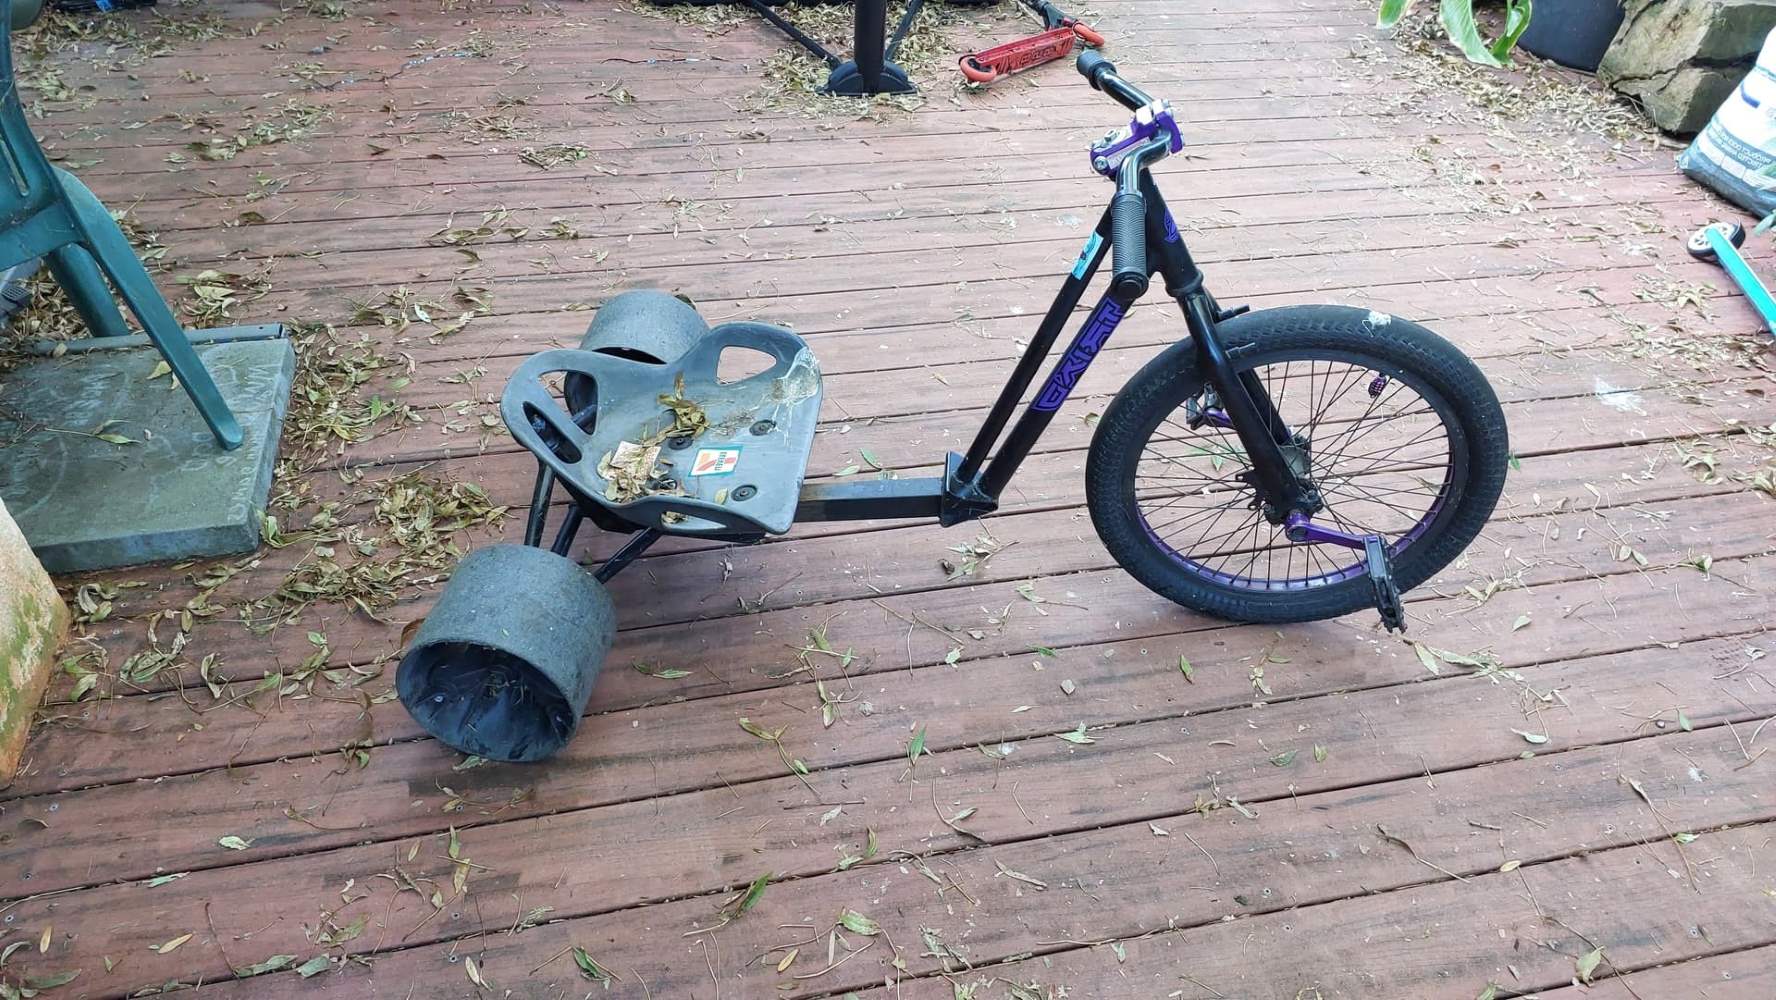 DIY Homemade Drifting Trike: How To Build Your Own Ultimate Drift Machine